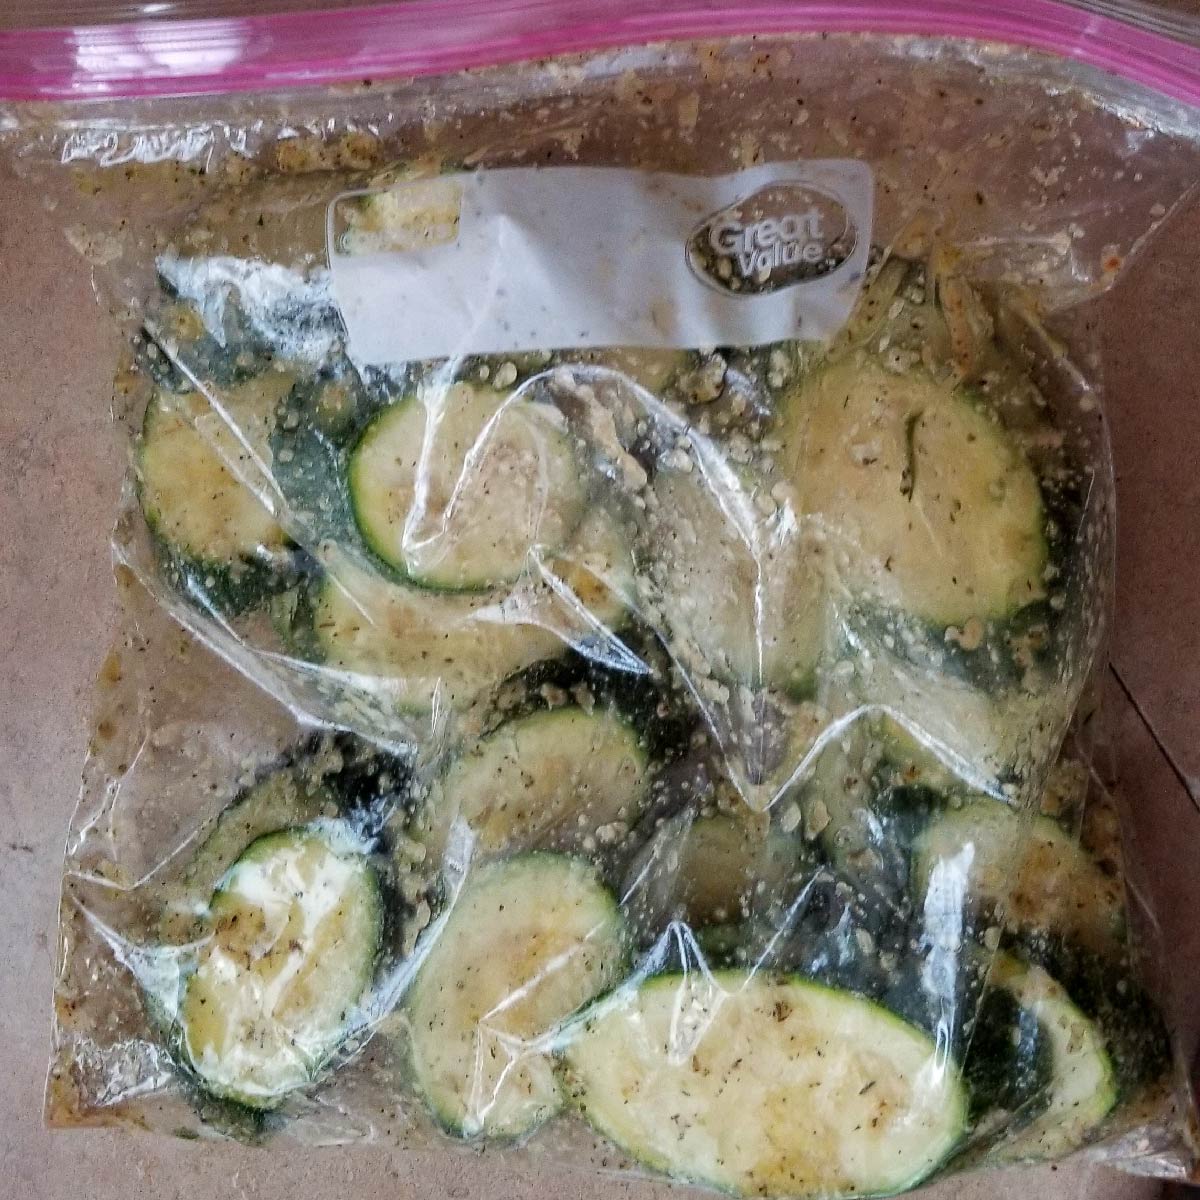 Zucchini sliced and in a storage bag to coat with seasoning mix.